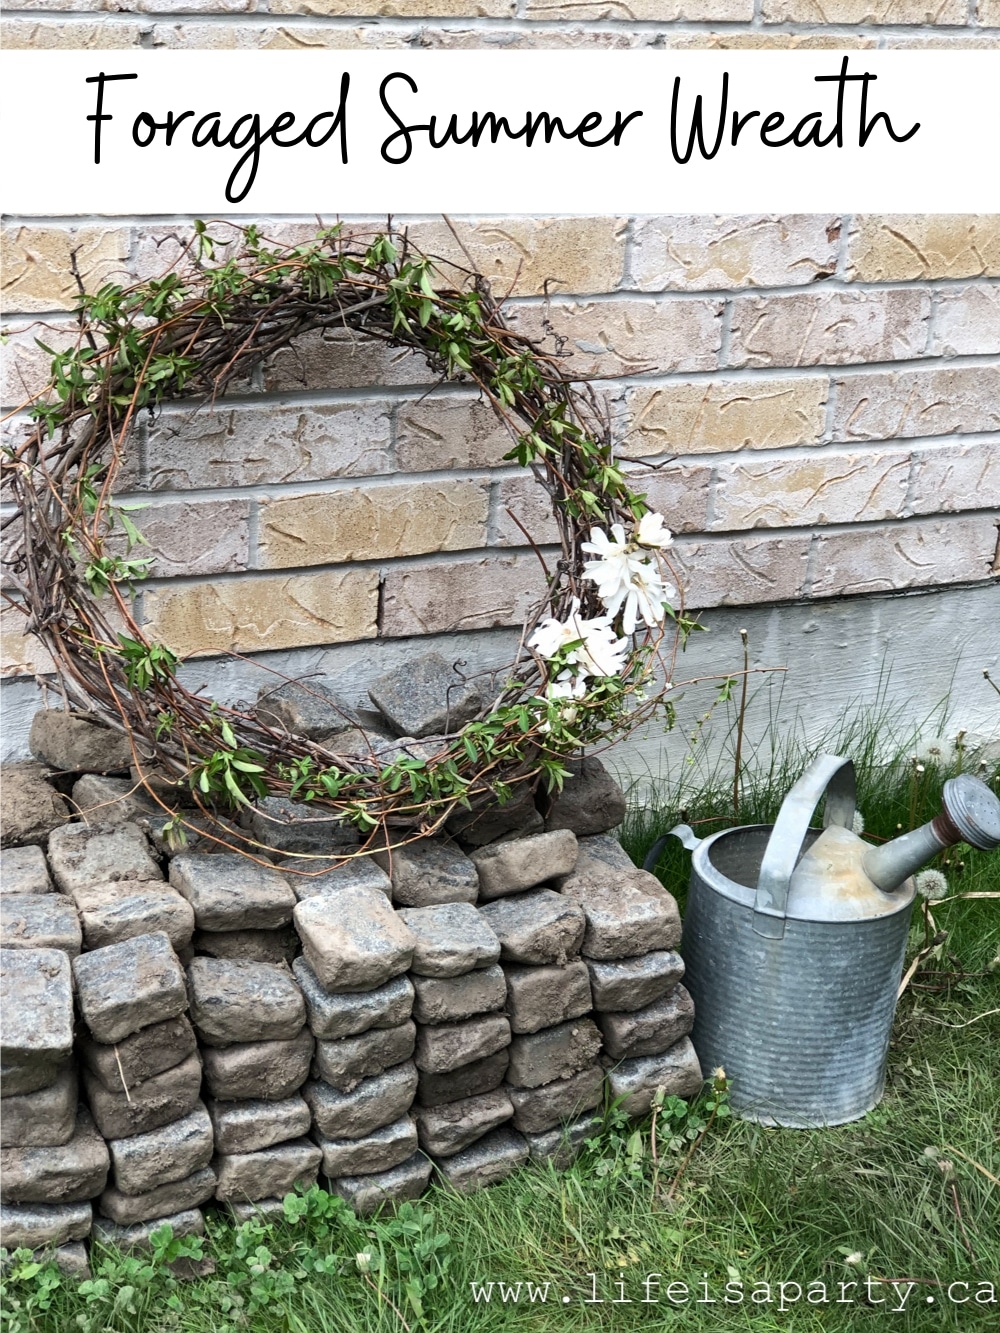 Foraged Wreath: made from foraged materials found on walks and in the garden, a base of grapevine gets a grouping of fresh flowers.